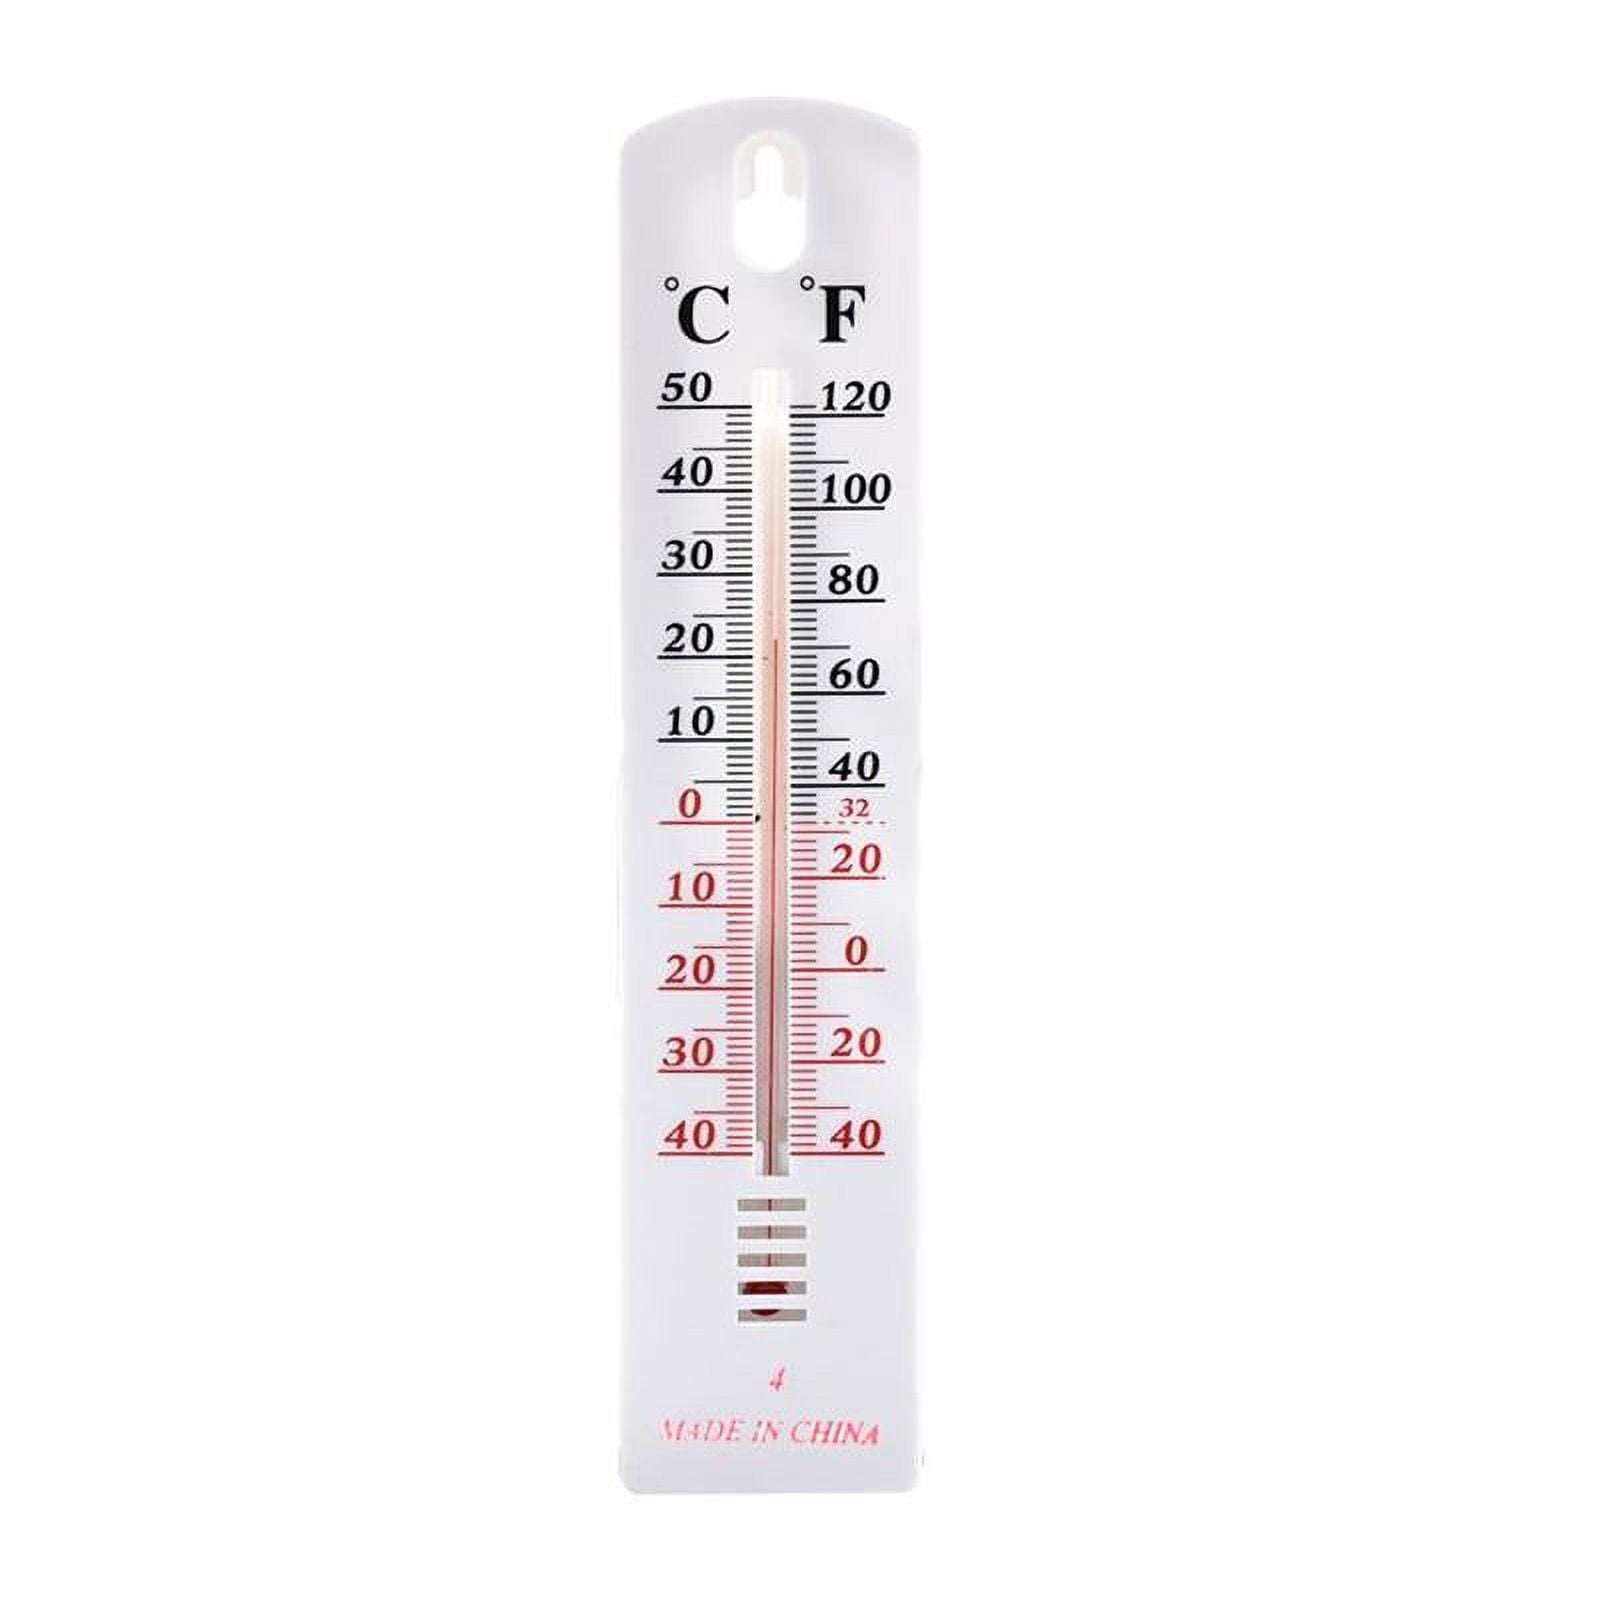 16 LARGE INDOOR OUTDOOR WALL THERMOMETER Weather Resistant Hanging Analog  Gauge